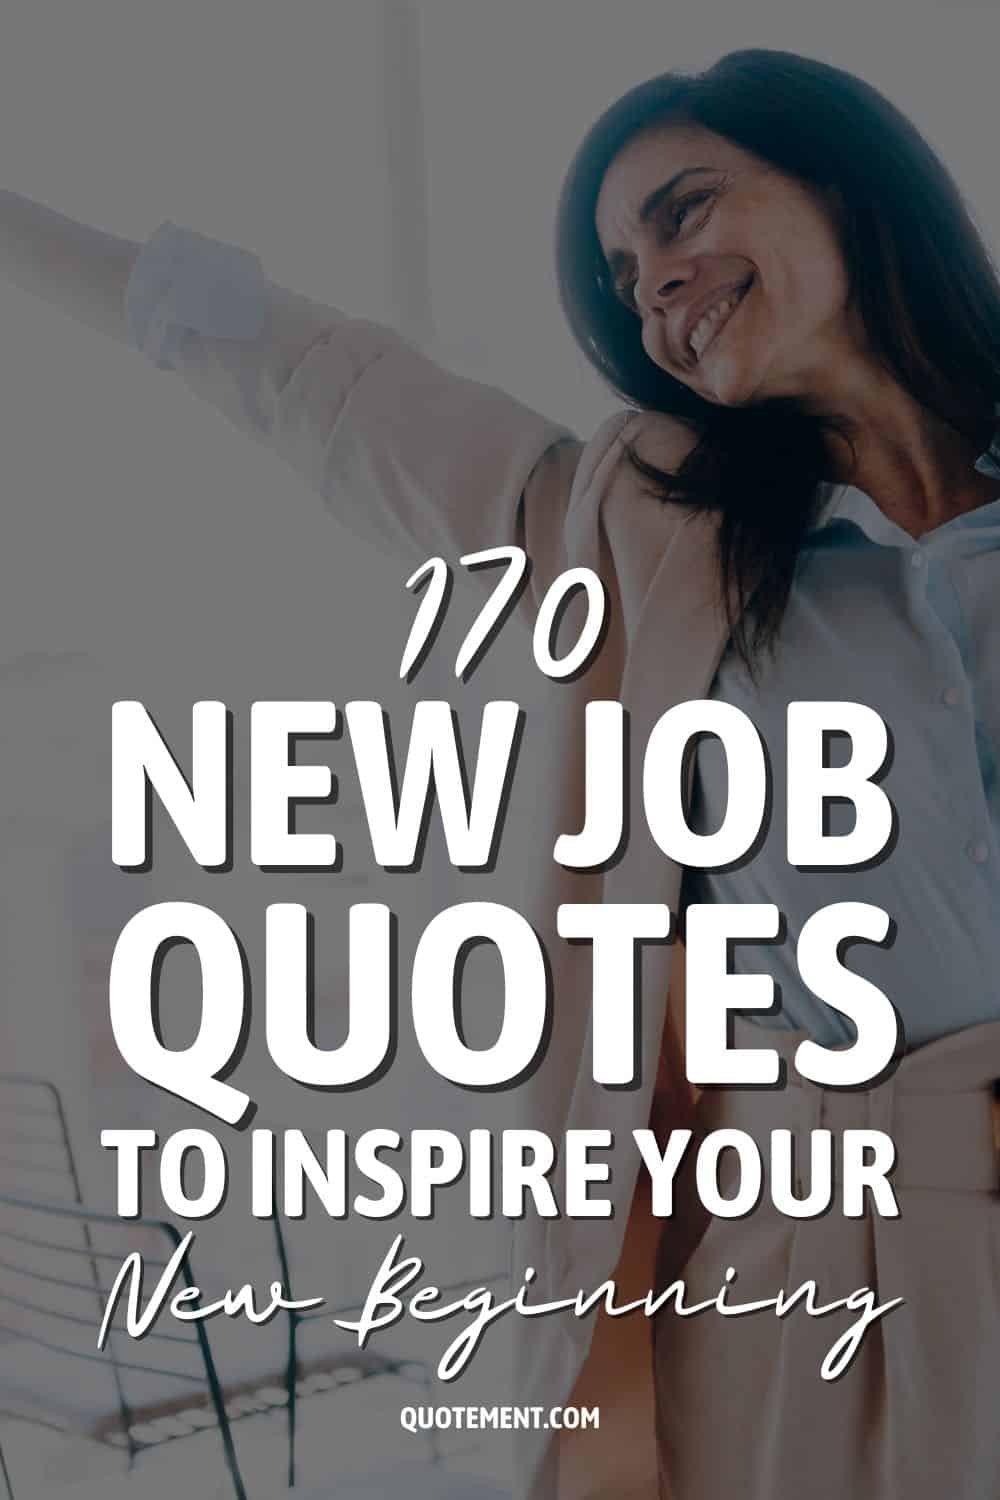 170 New Job Quotes To Inspire Your New Beginning
